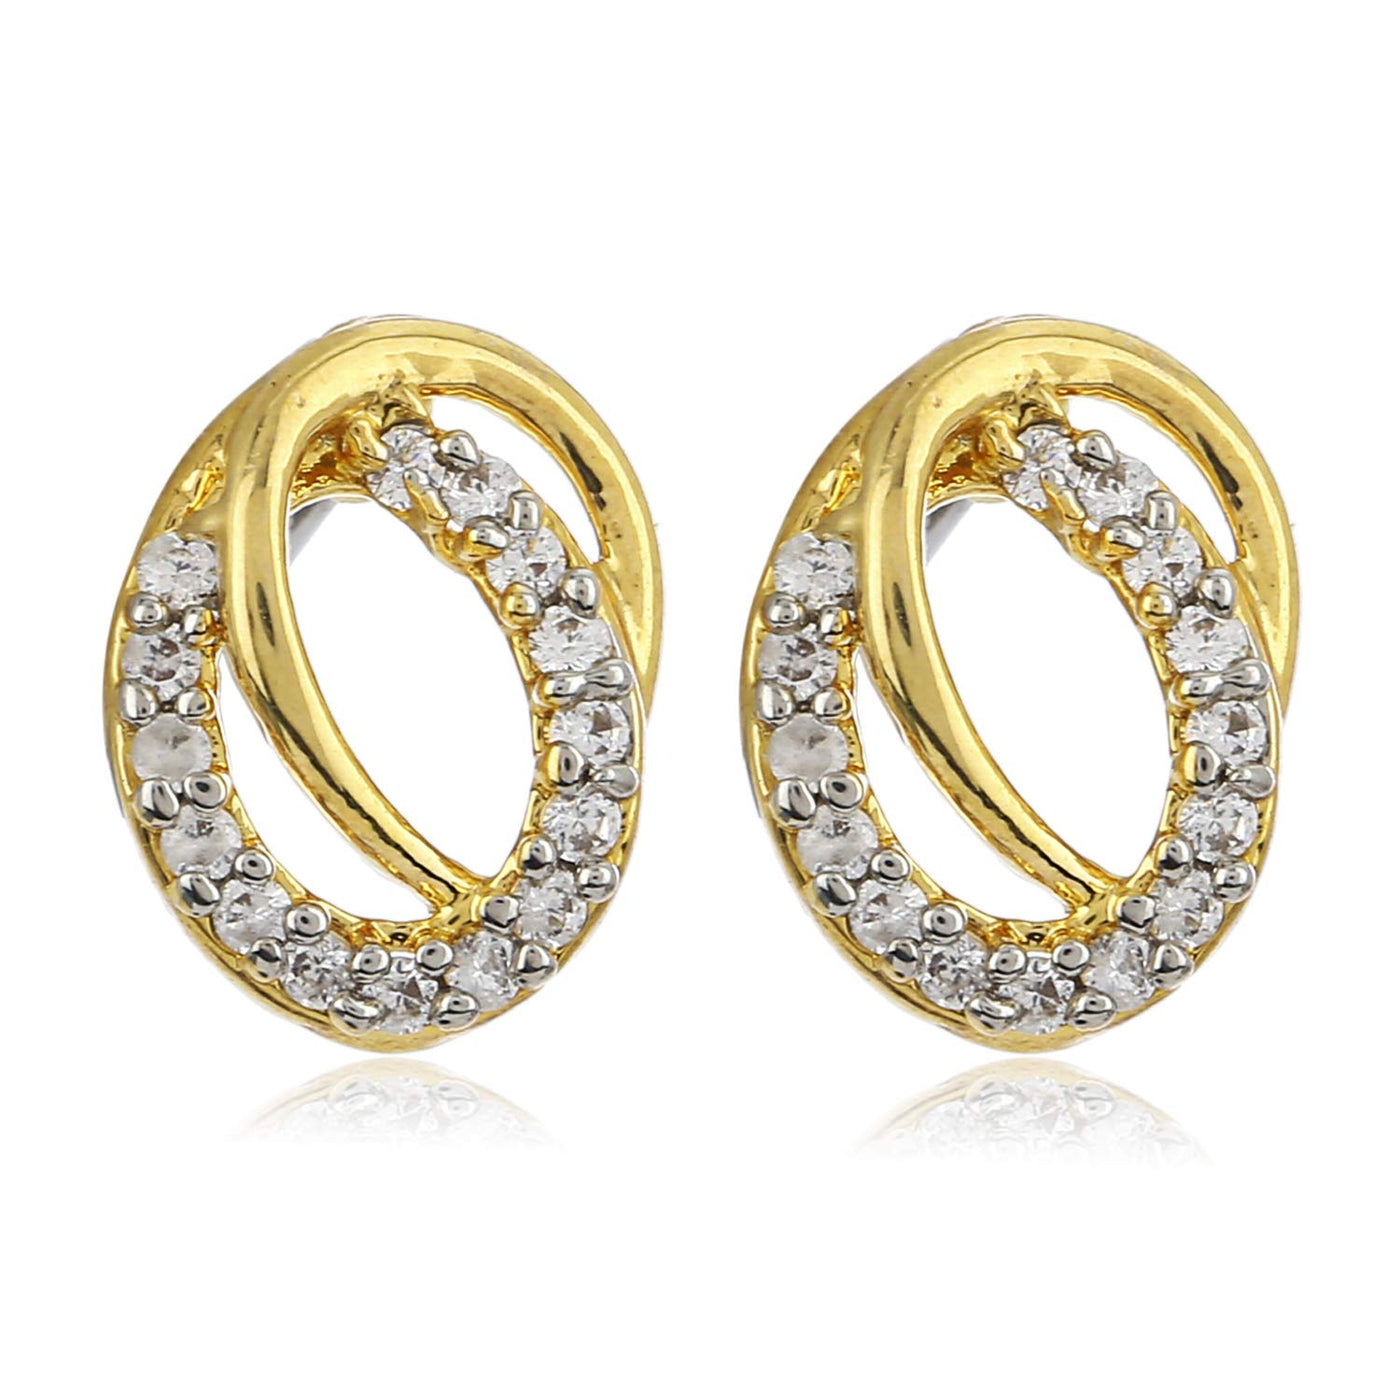 Estele Gift combo - Gold Plated Stud Earrings With AD stones For Girls & Women